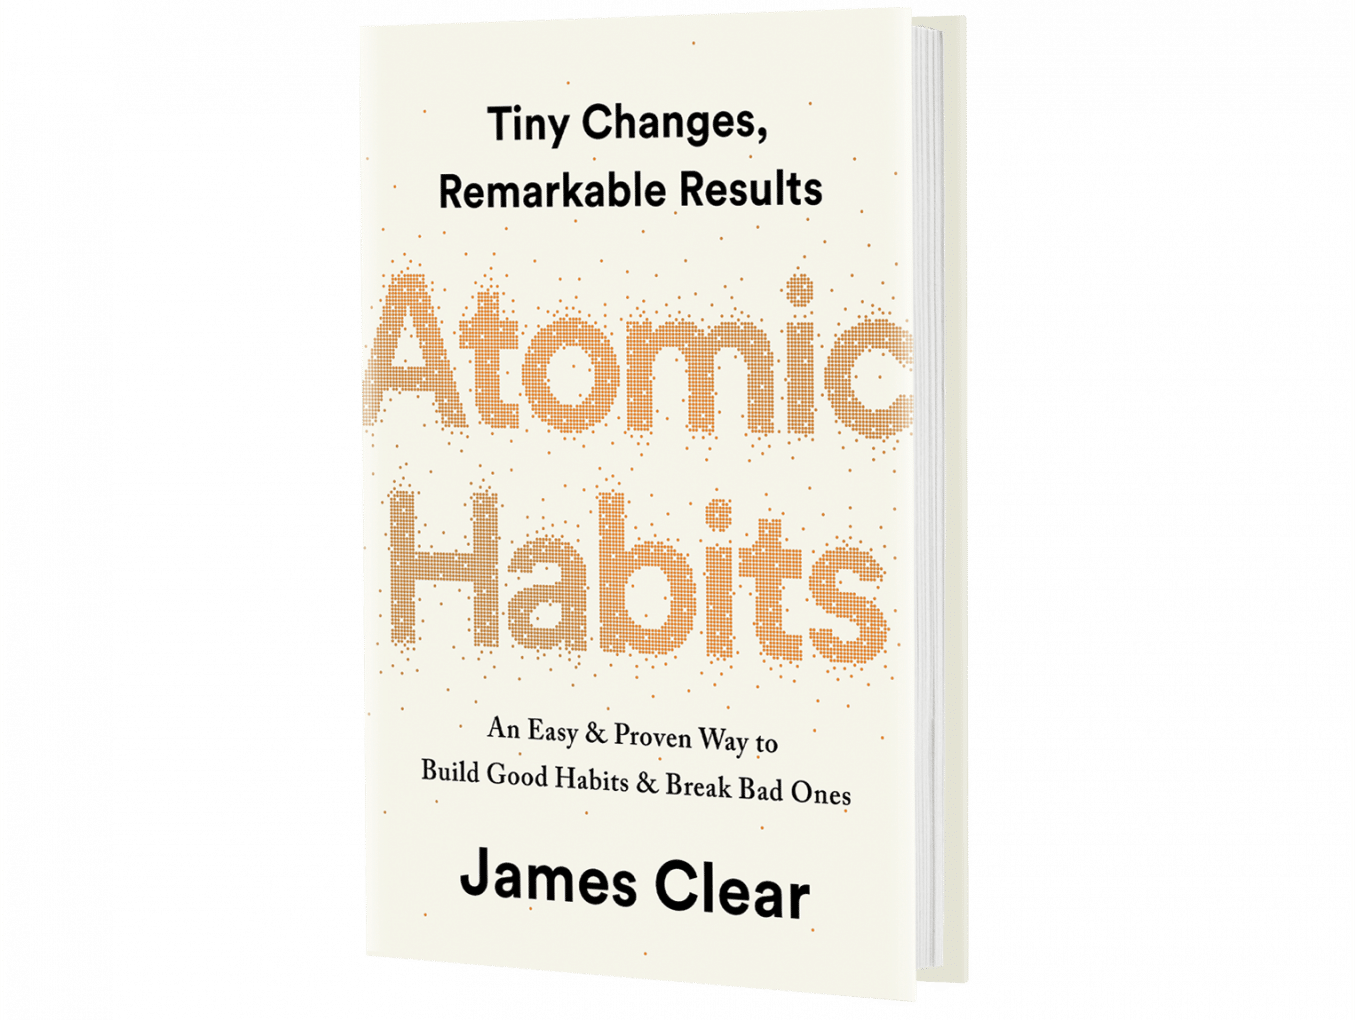 Atomic Habits for windows download